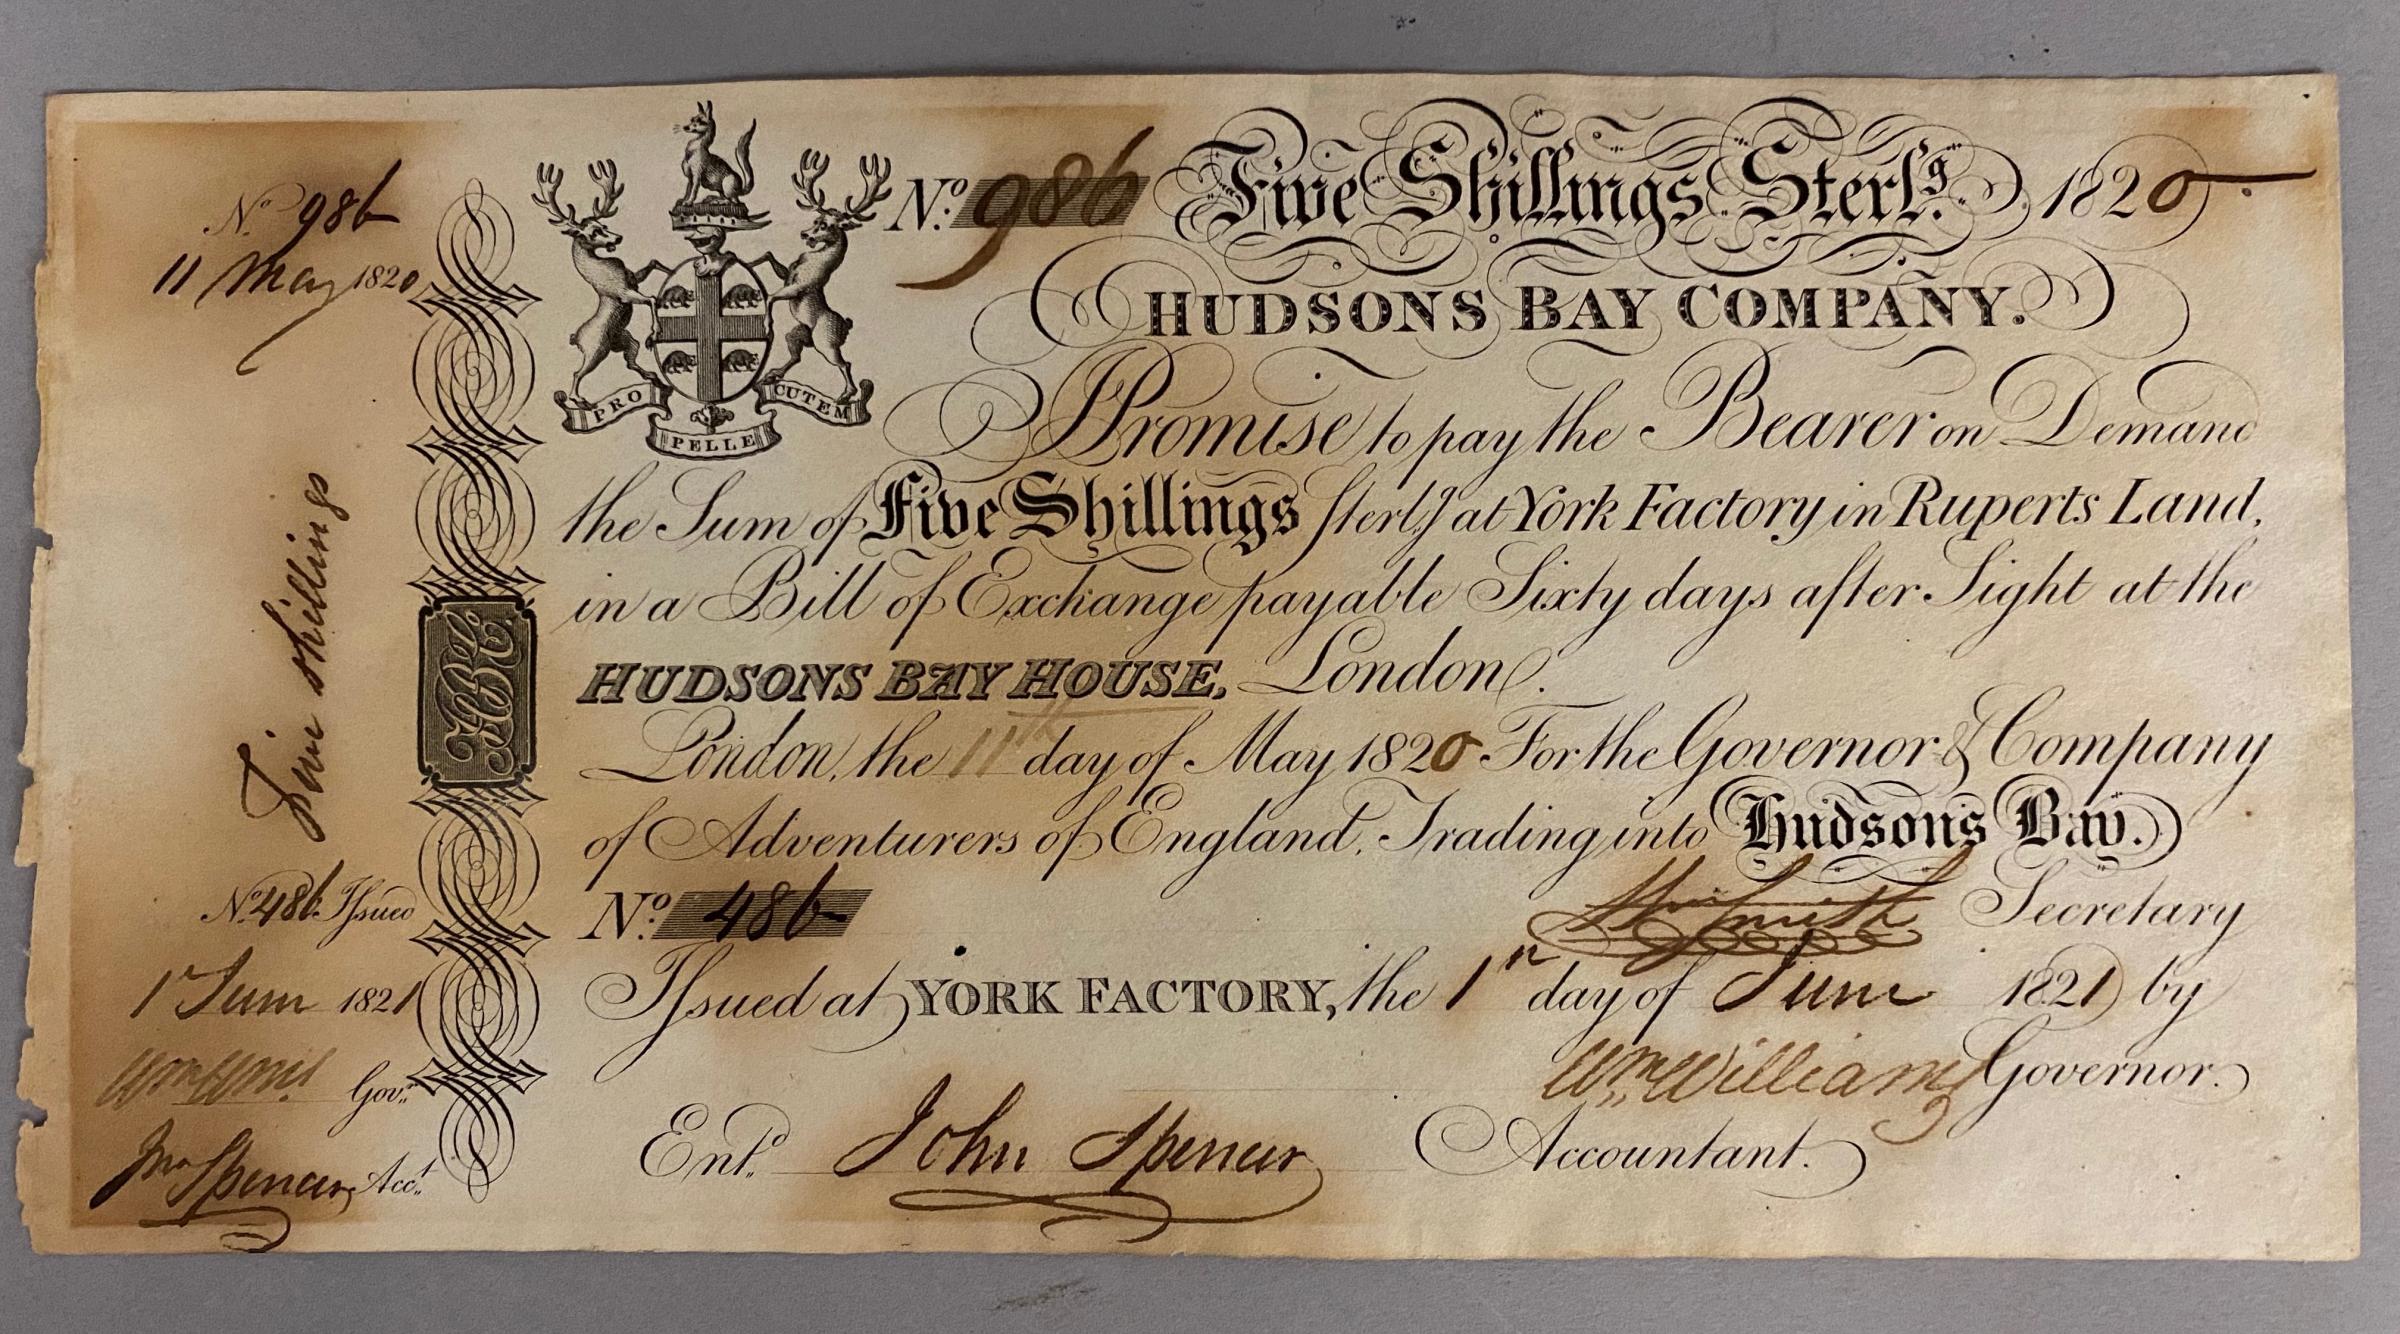 Hudson's Bay Company Five Shillings Promissory Note, 11 May 1820